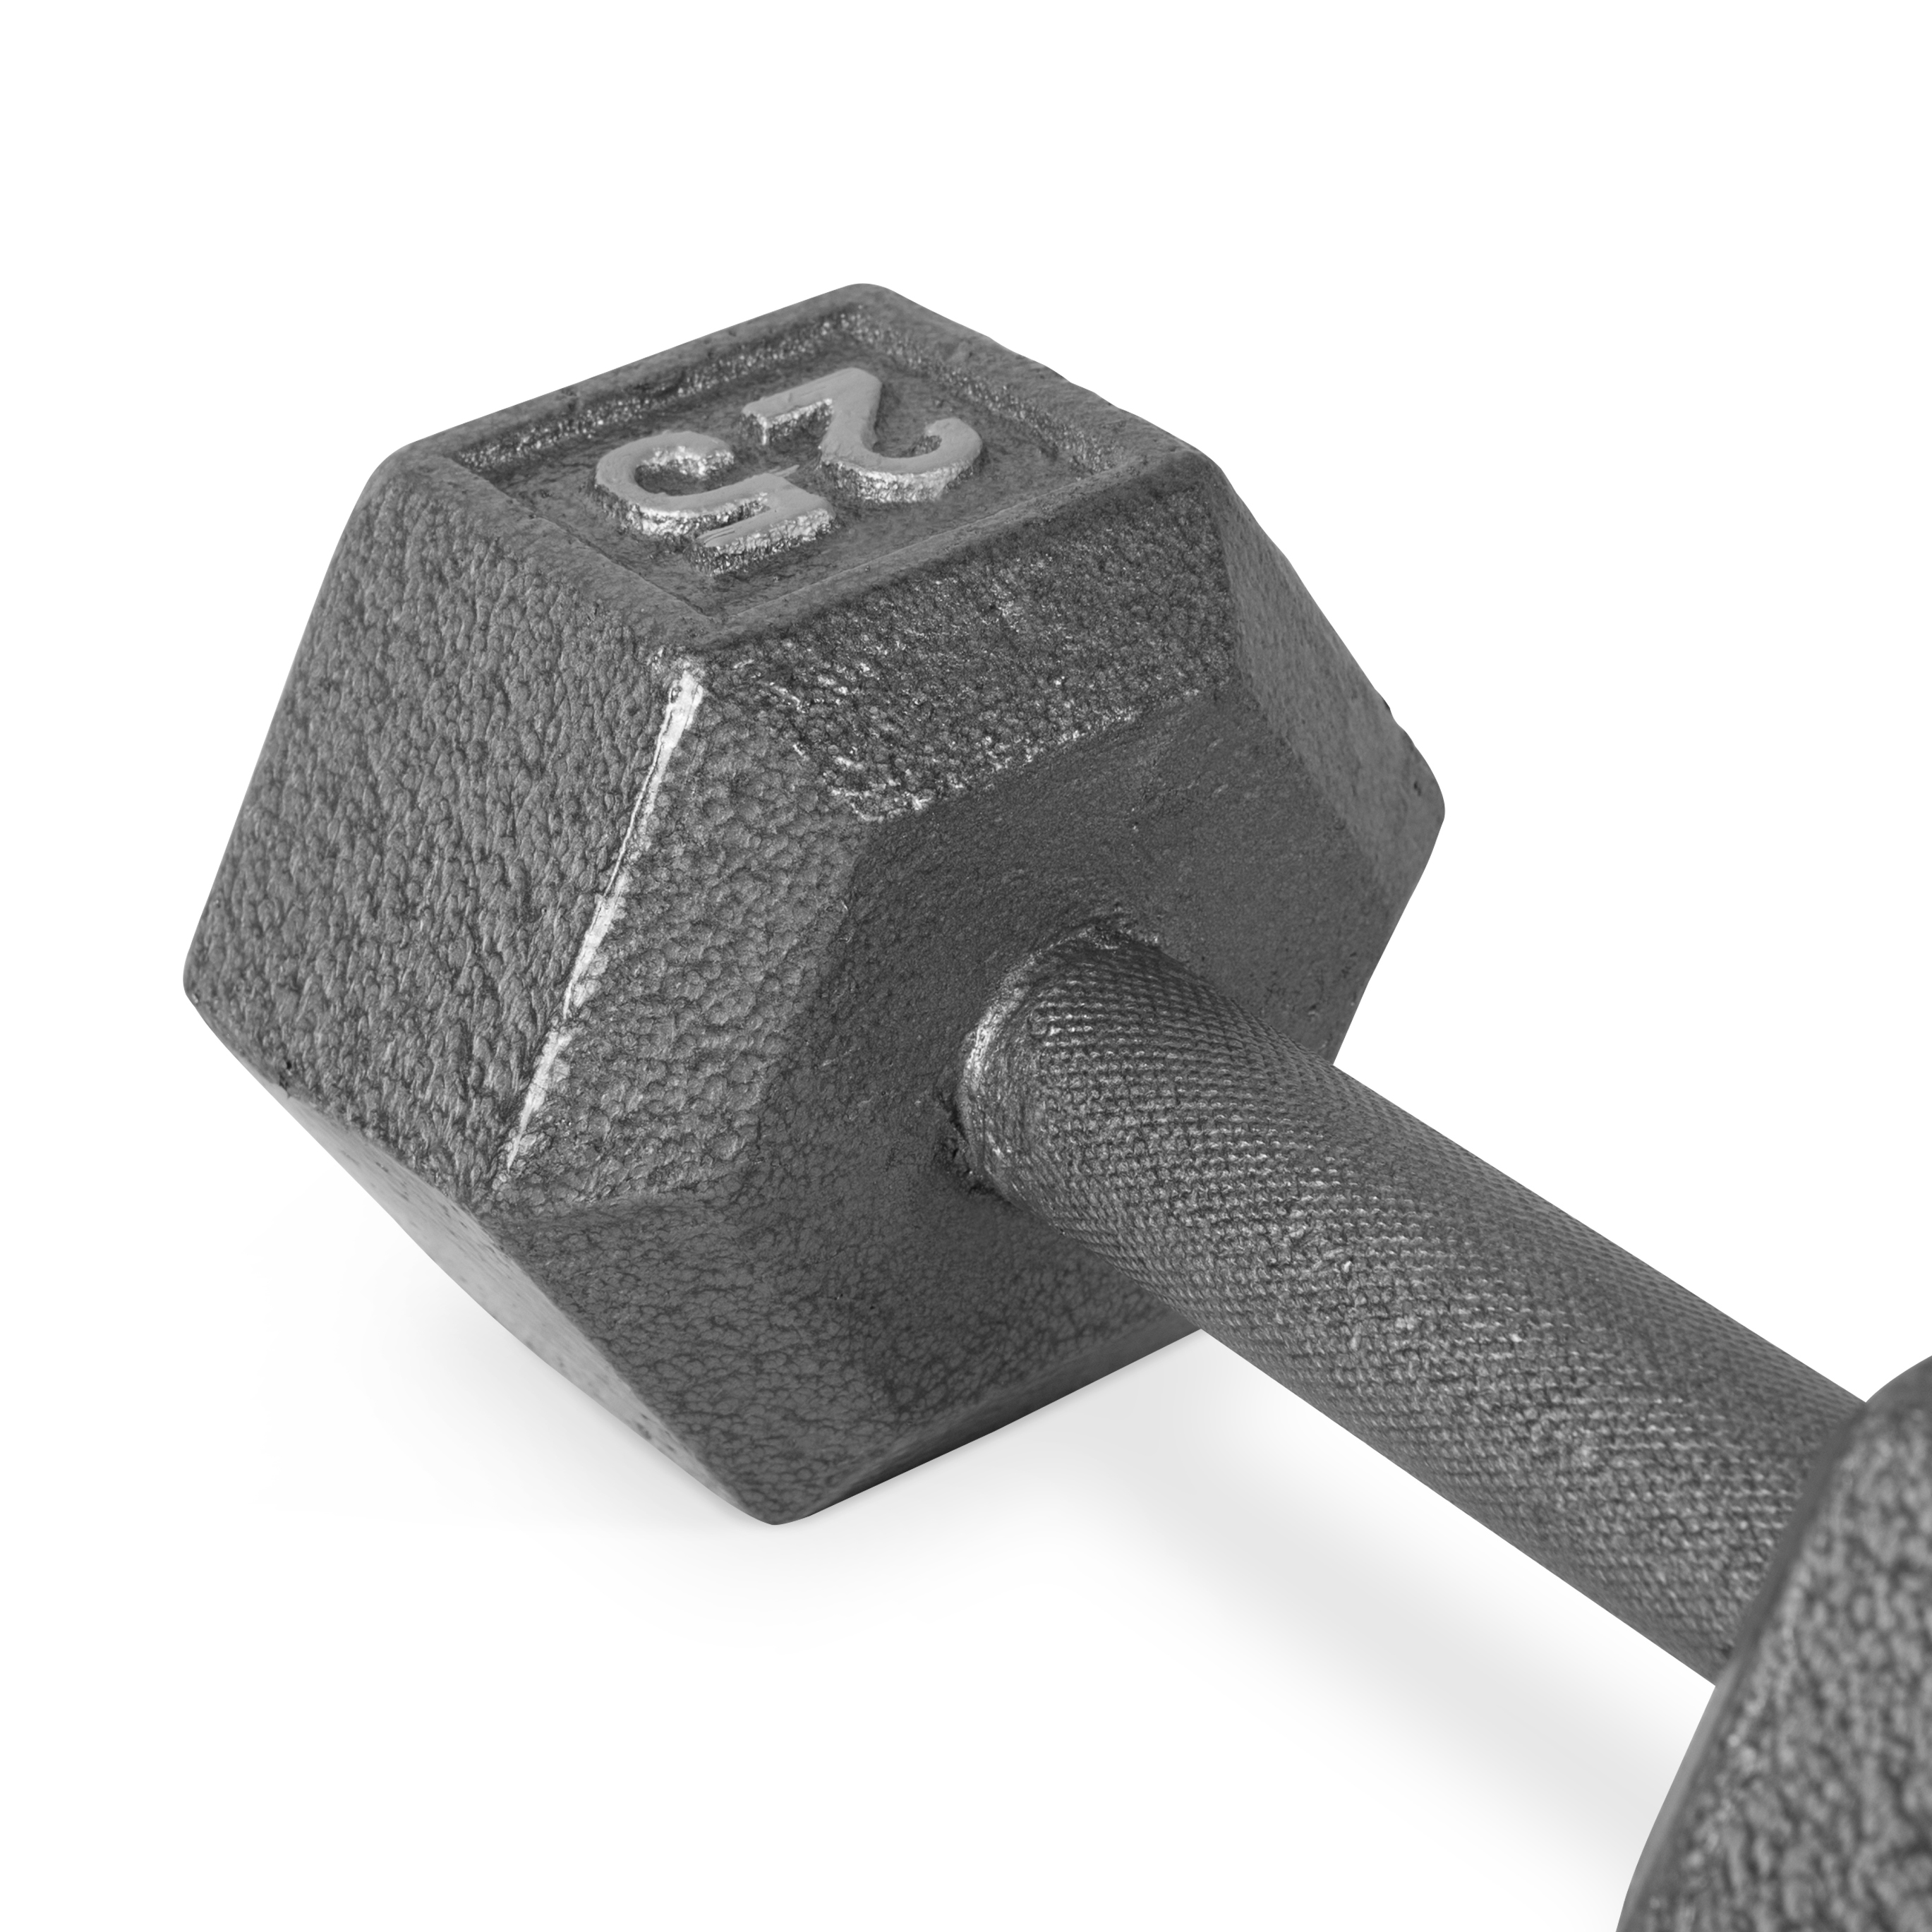 CAP Barbell 25lb Cast Iron Hex Dumbbell, Single - image 5 of 6